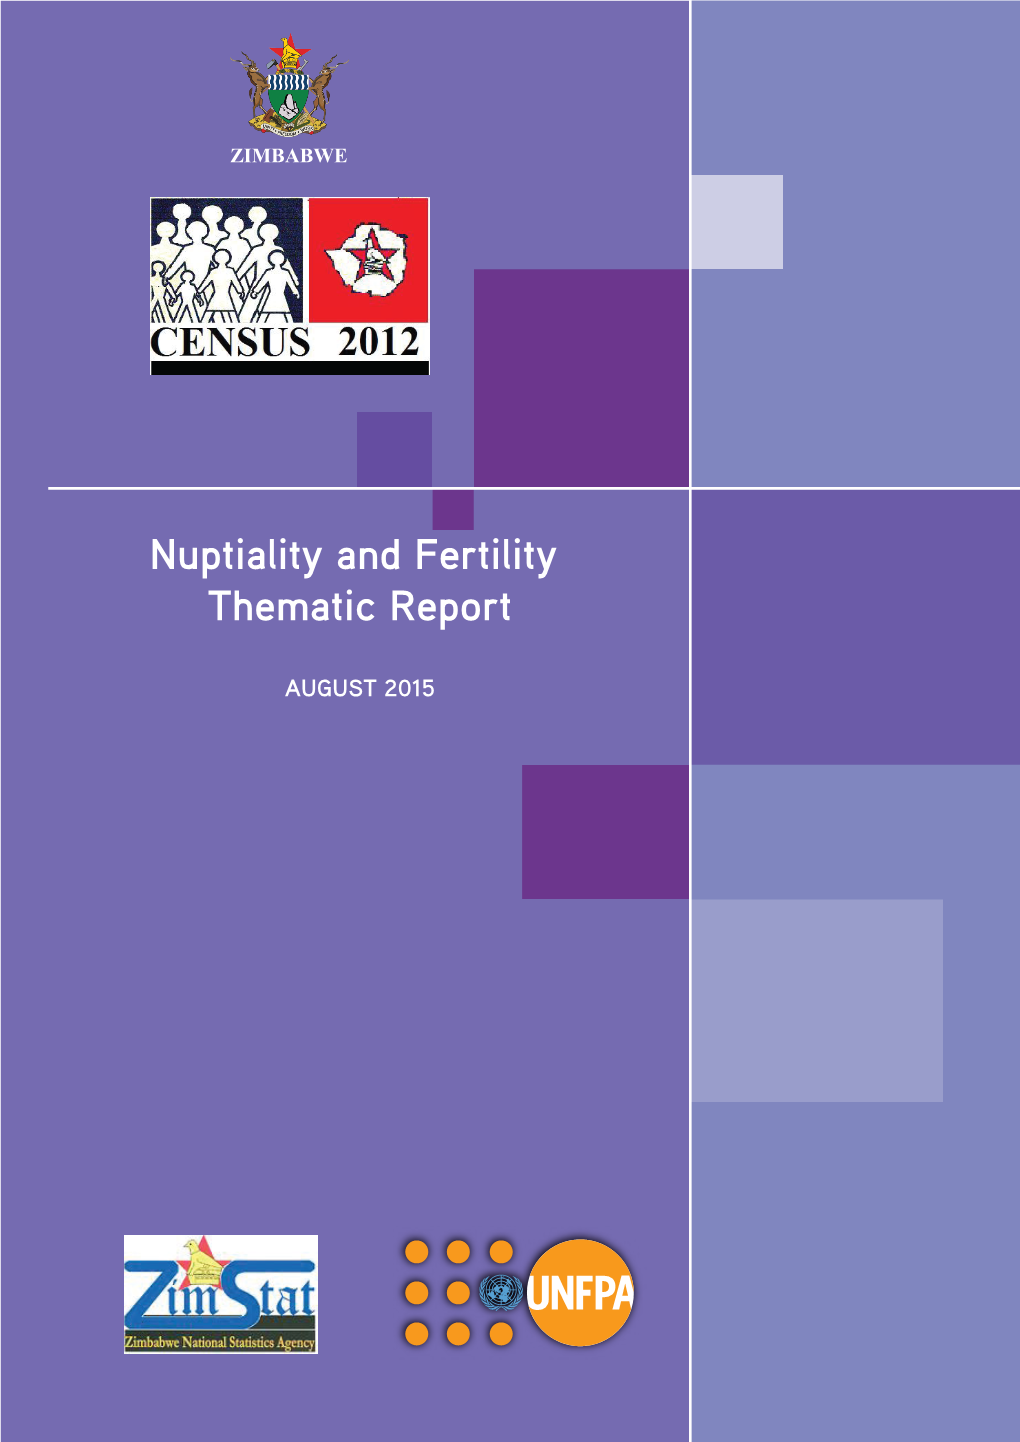 Nuptiality and Fertility Thematic Report 2015